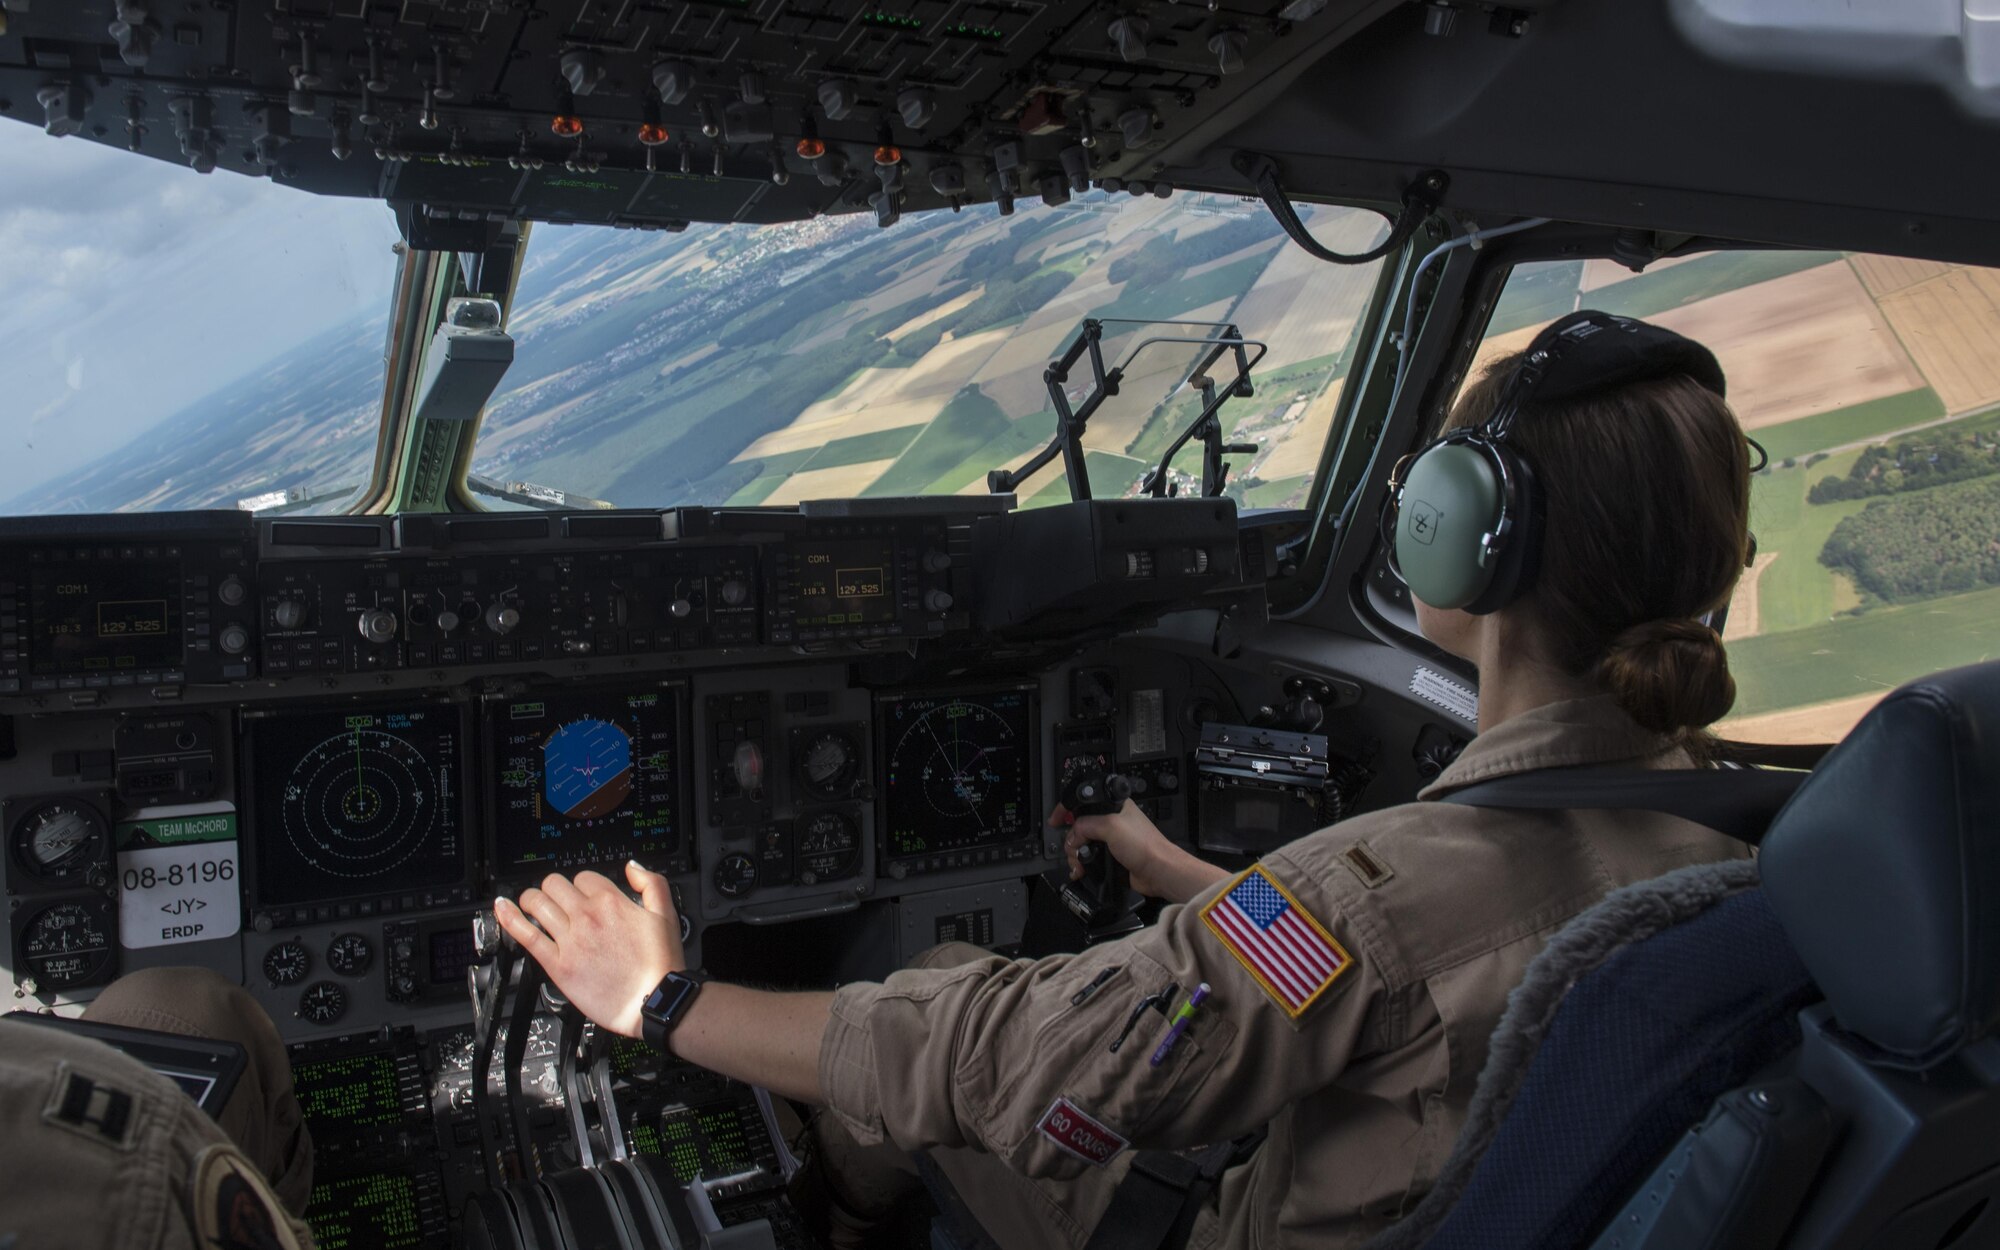 U.S. Air Force Reserve 2nd Lt. Reily Finnelly, 97th Airlift Squadron pilot, flies a C-17 Globemaster III to transport U.S. Army 2nd Cavalry Regiment Interim Armored Vehicle Strykers to Plovdiv Airport, Bulgaria, July 14, 2017. The U.S. Air Force's capability for rapid mobility allows U.S. and allied power to be projected quickly to anywhere on the globe. (U.S. Air Force photo by Senior Airman Tryphena Mayhugh)